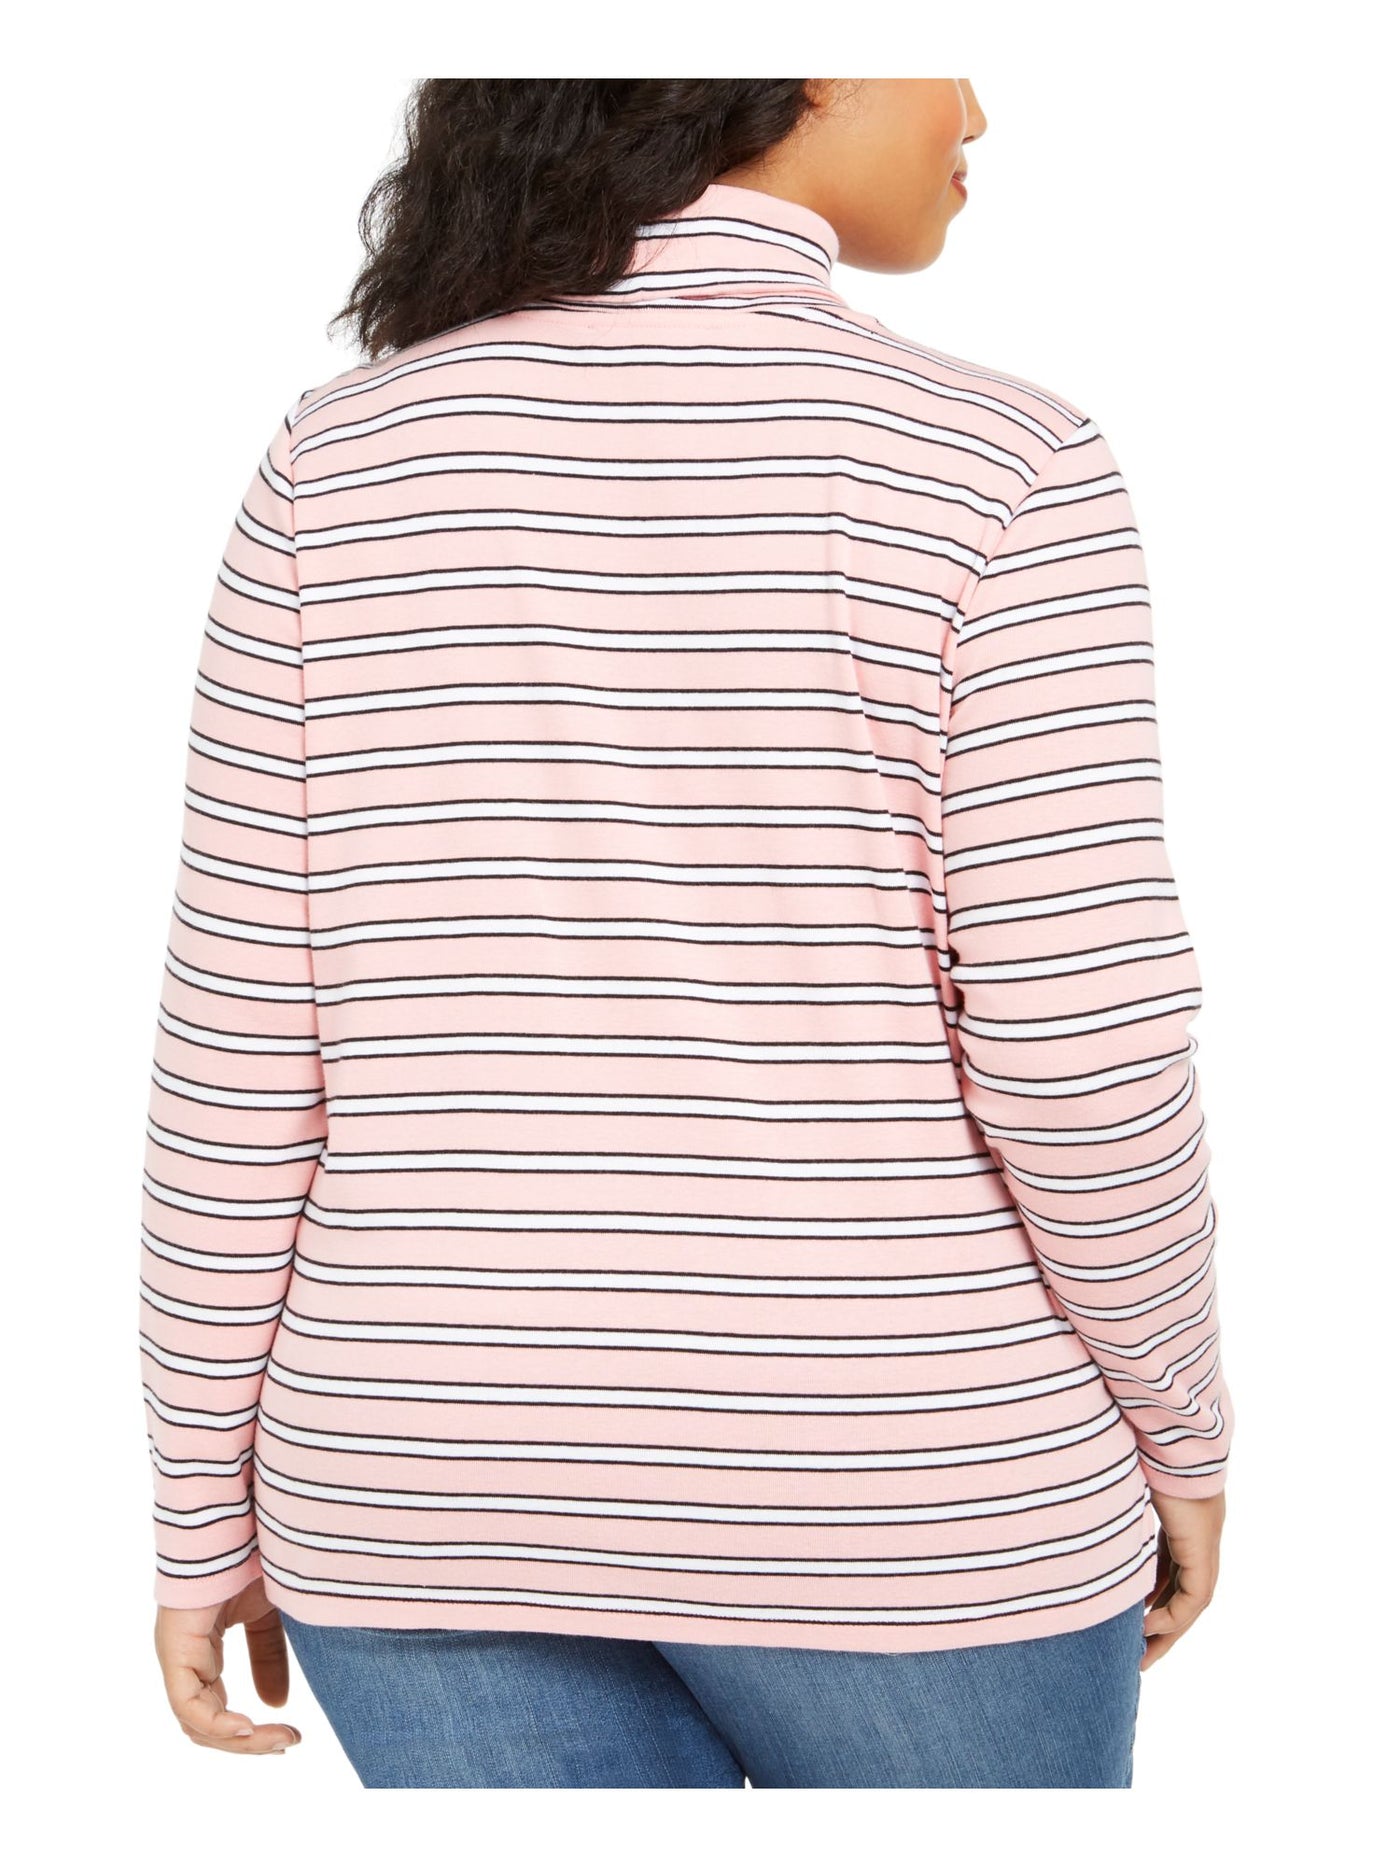 TOMMY HILFIGER Womens Pink Striped Long Sleeve Collared Blouse Plus 1X